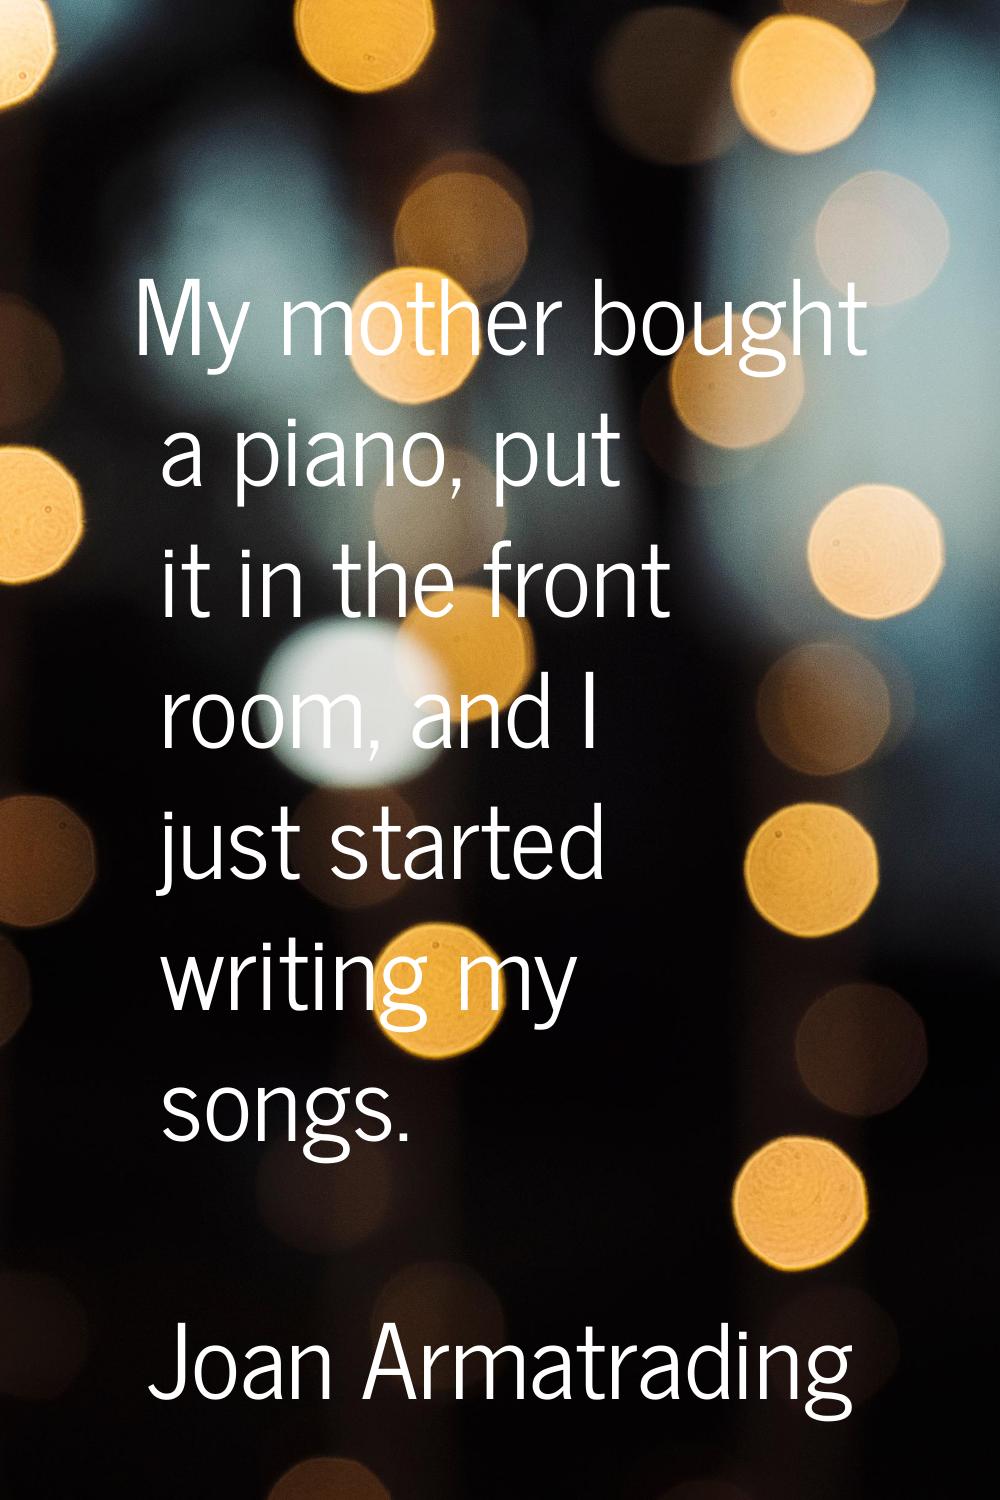 My mother bought a piano, put it in the front room, and I just started writing my songs.